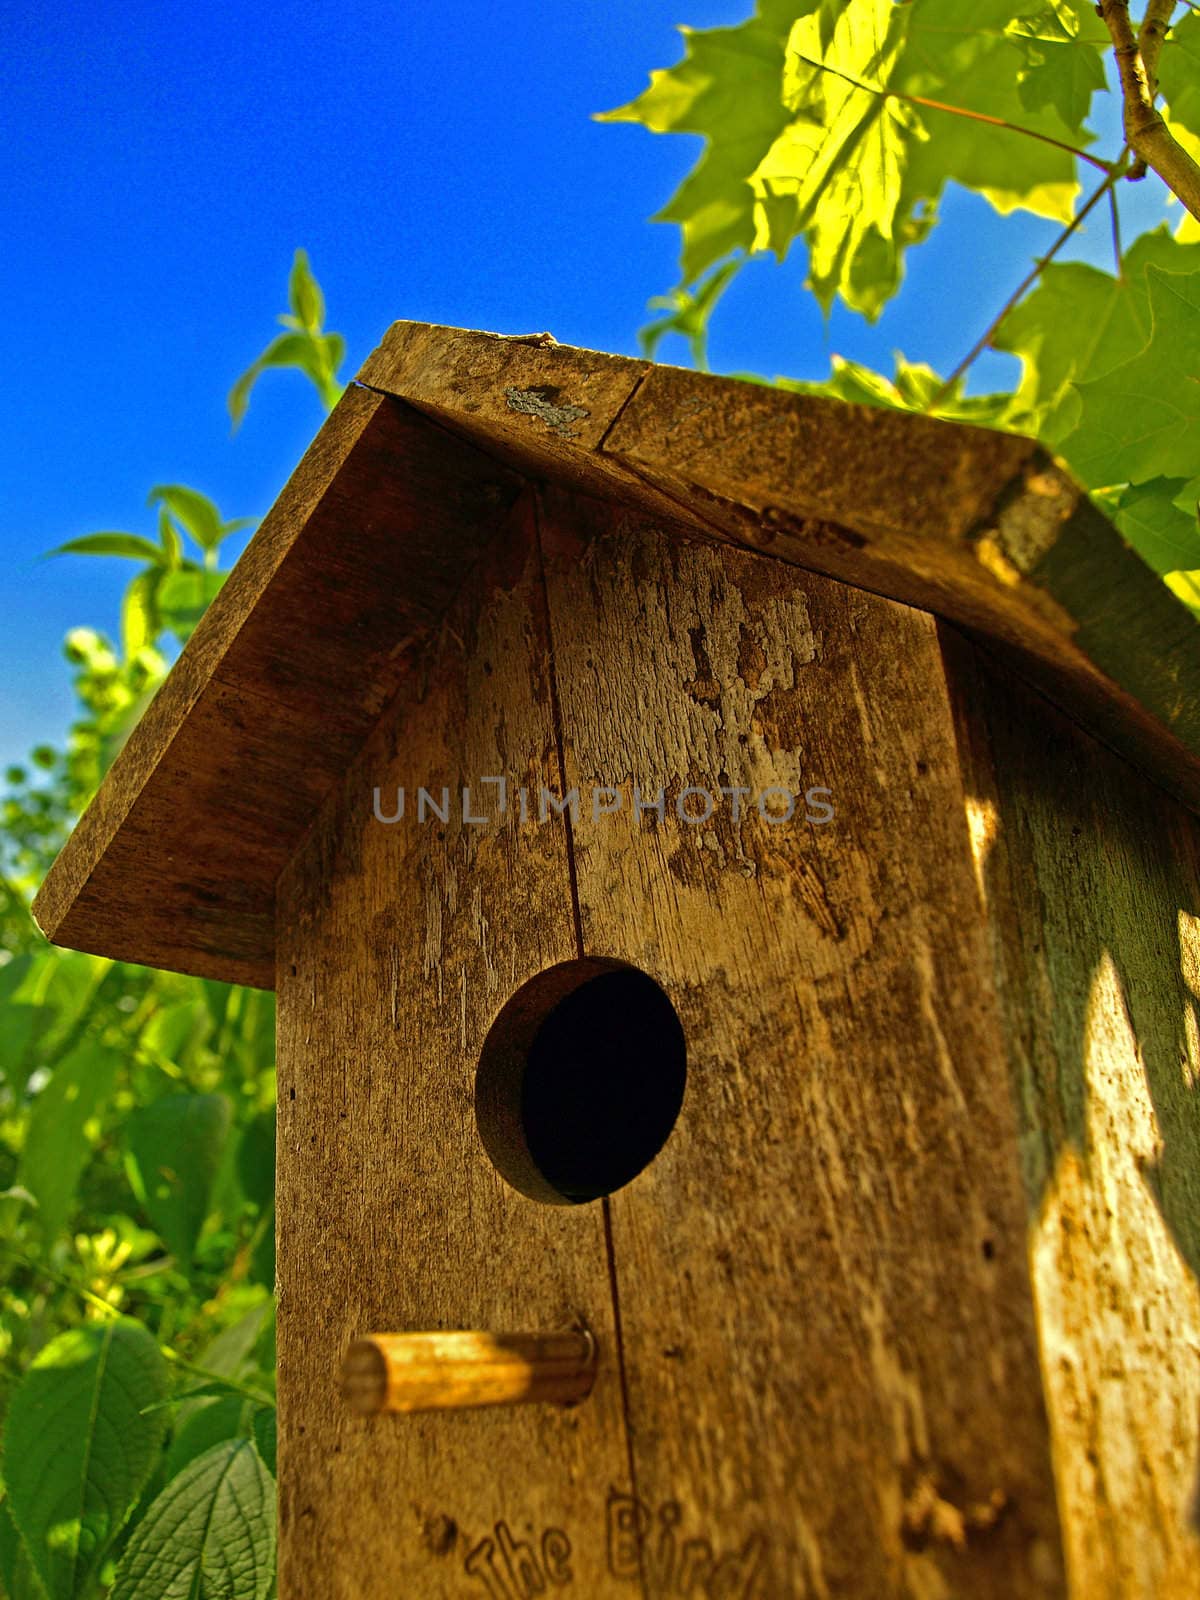 a birdhouse in a maple tree with a blue sky